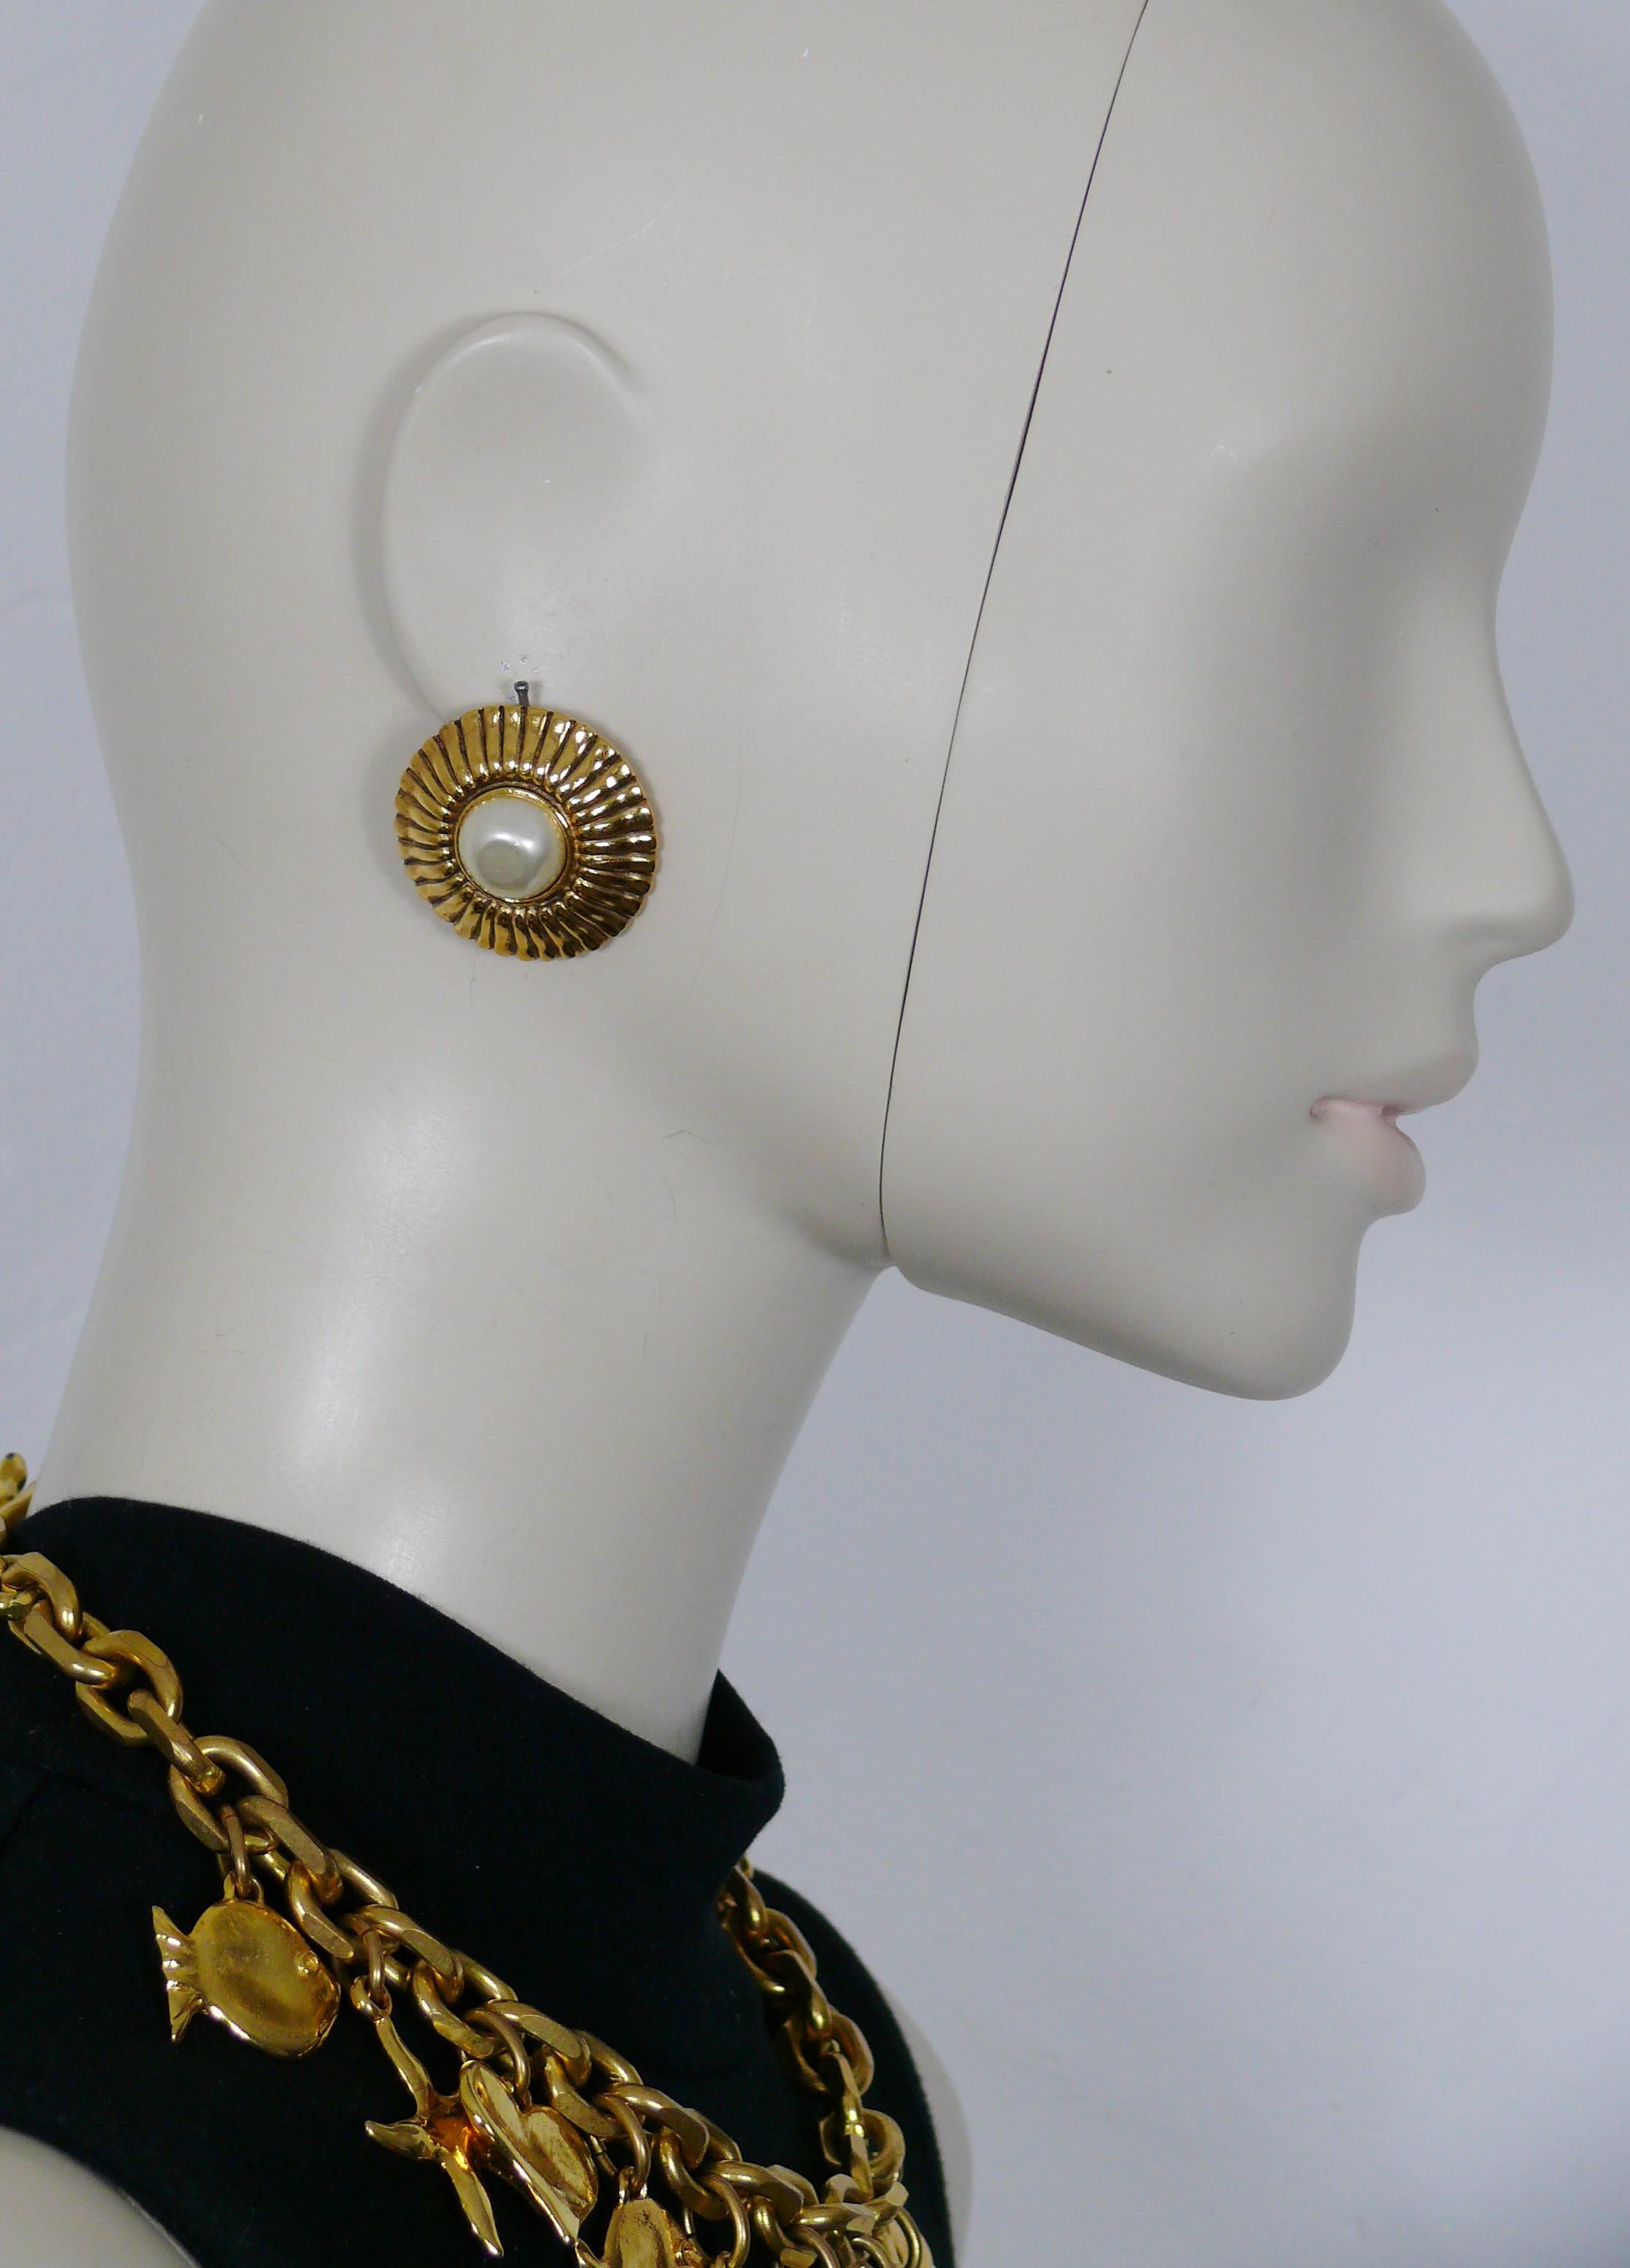 CHANEL vintage massive gold toned clip-on earrings featuring a radiant design with a faux pearl at the center.

Embossed CHANEL Made in France.

Indicative measurements : diameter approx. 3.2 cm (1.26 inches).

NOTES
- This is a preloved vintage